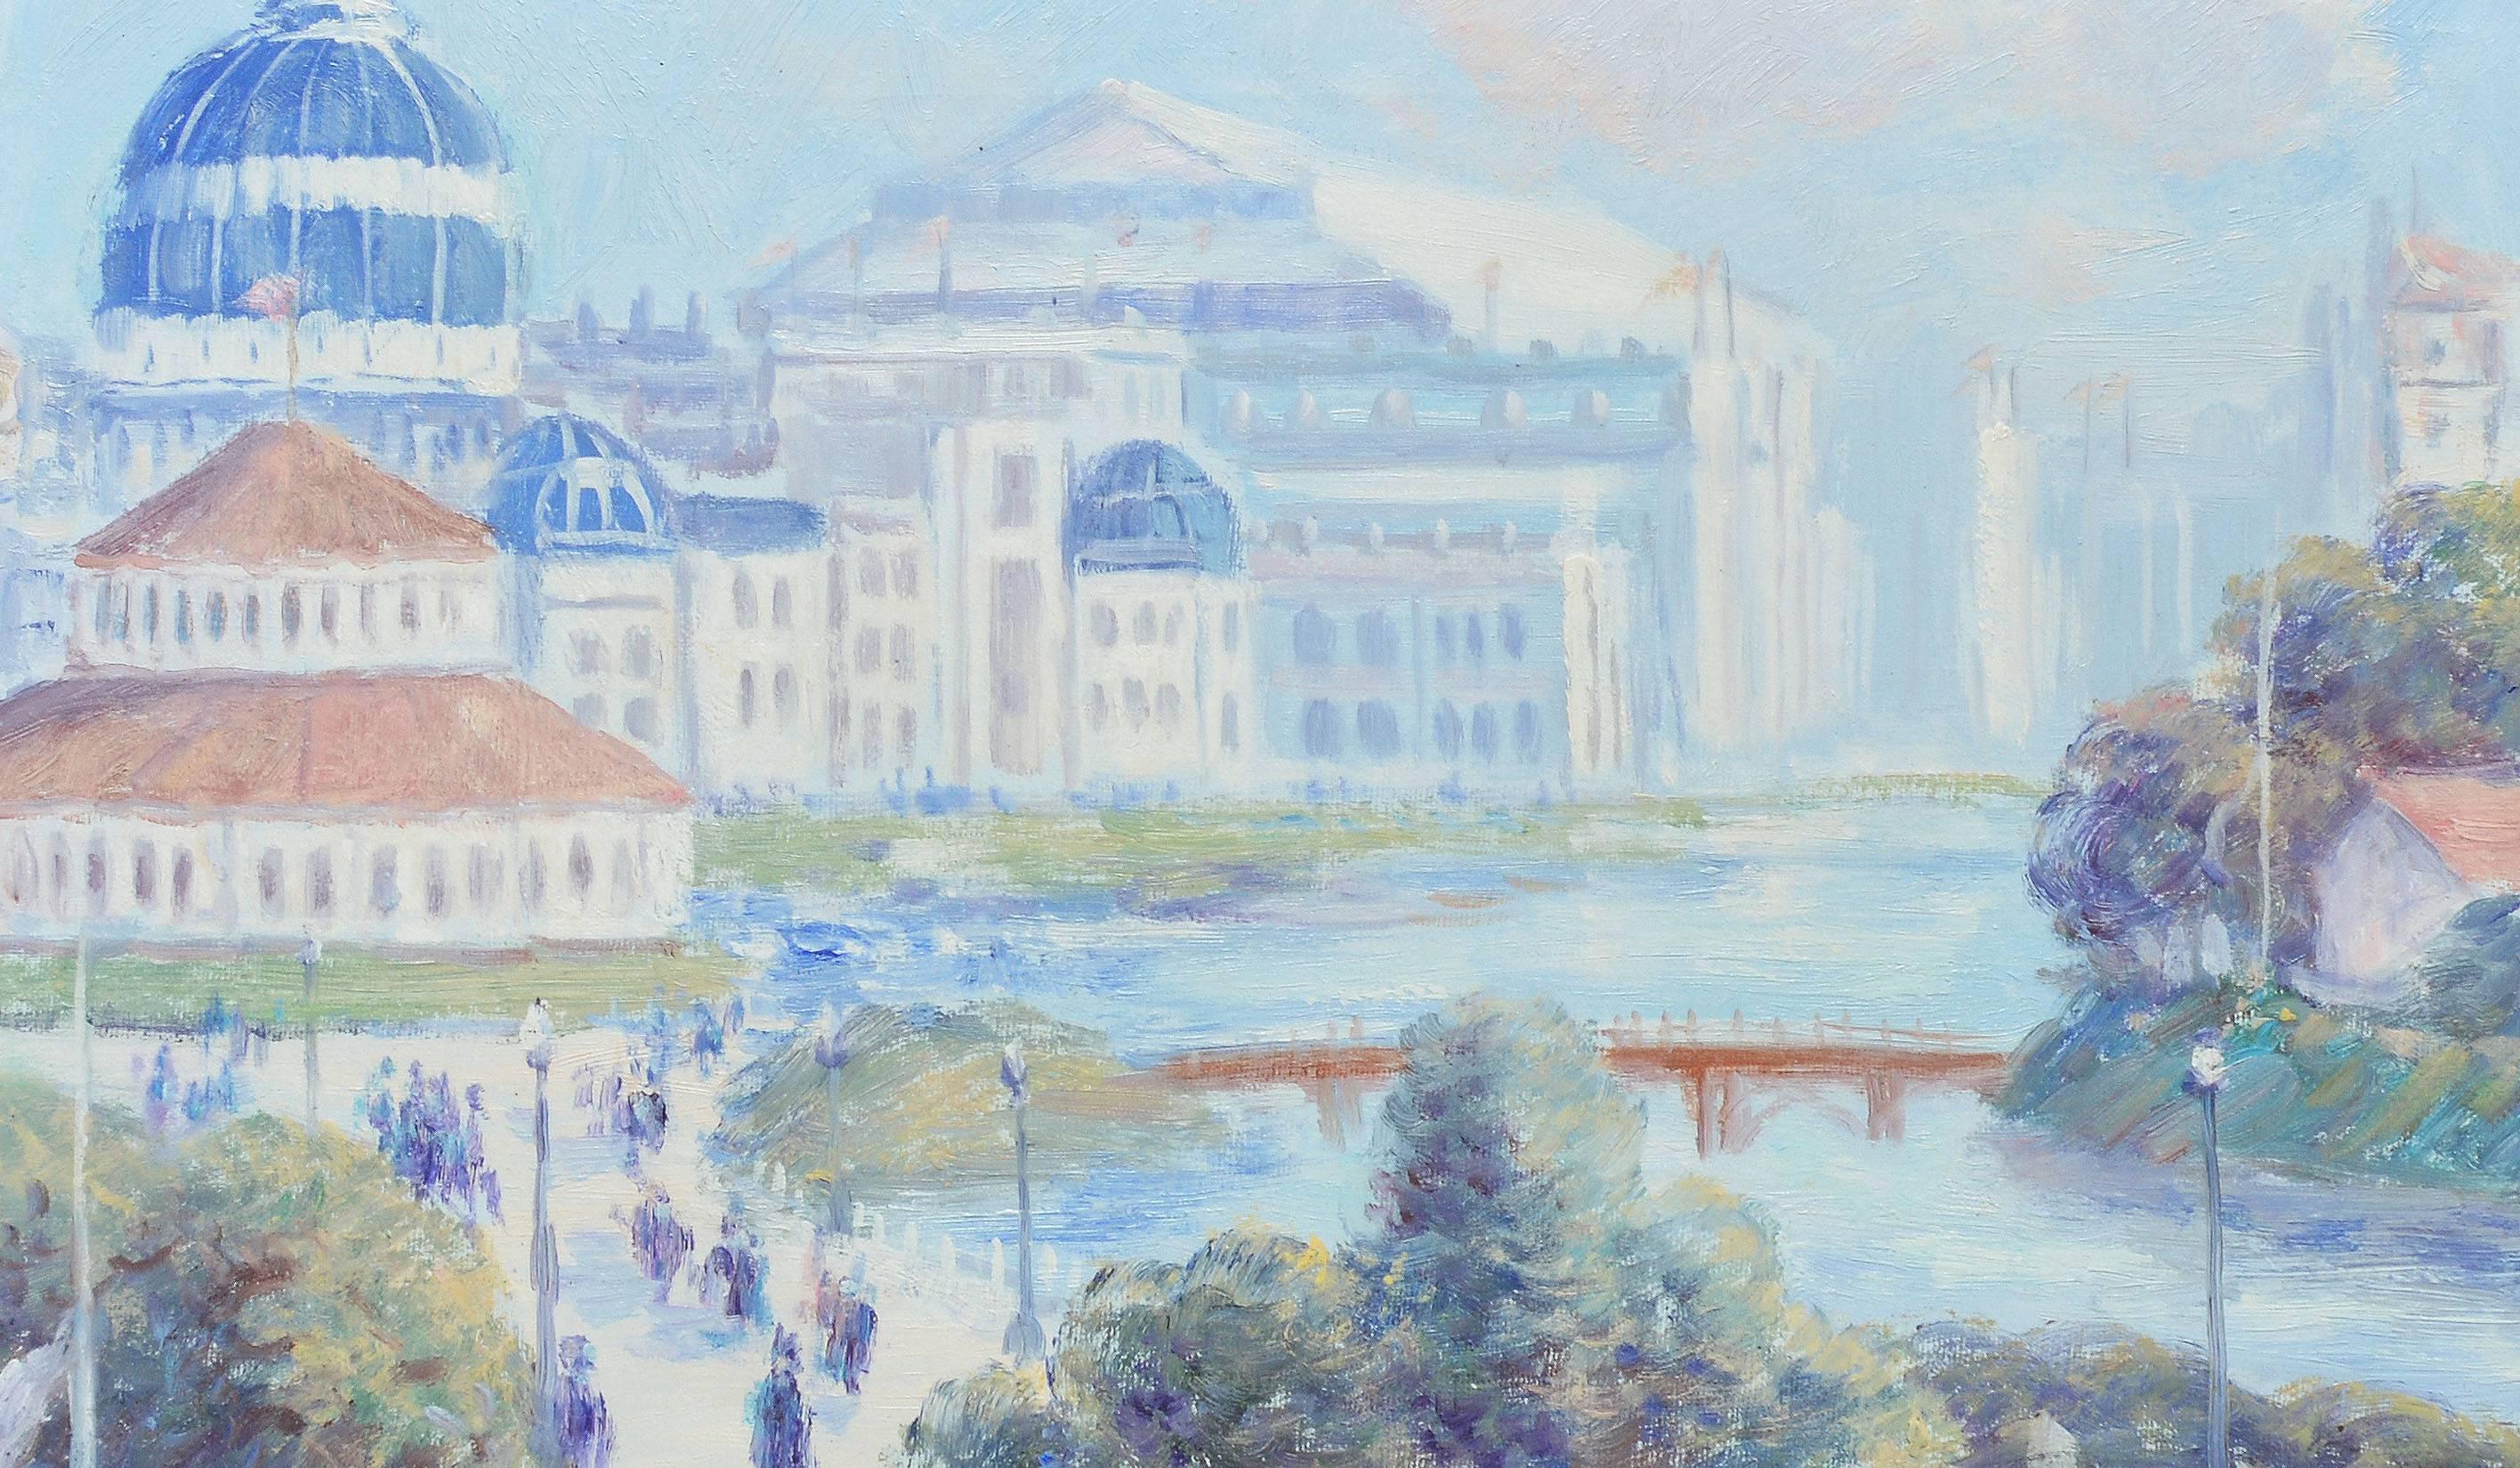 Impressionist View of a City by Gail Sherman Corbett 2